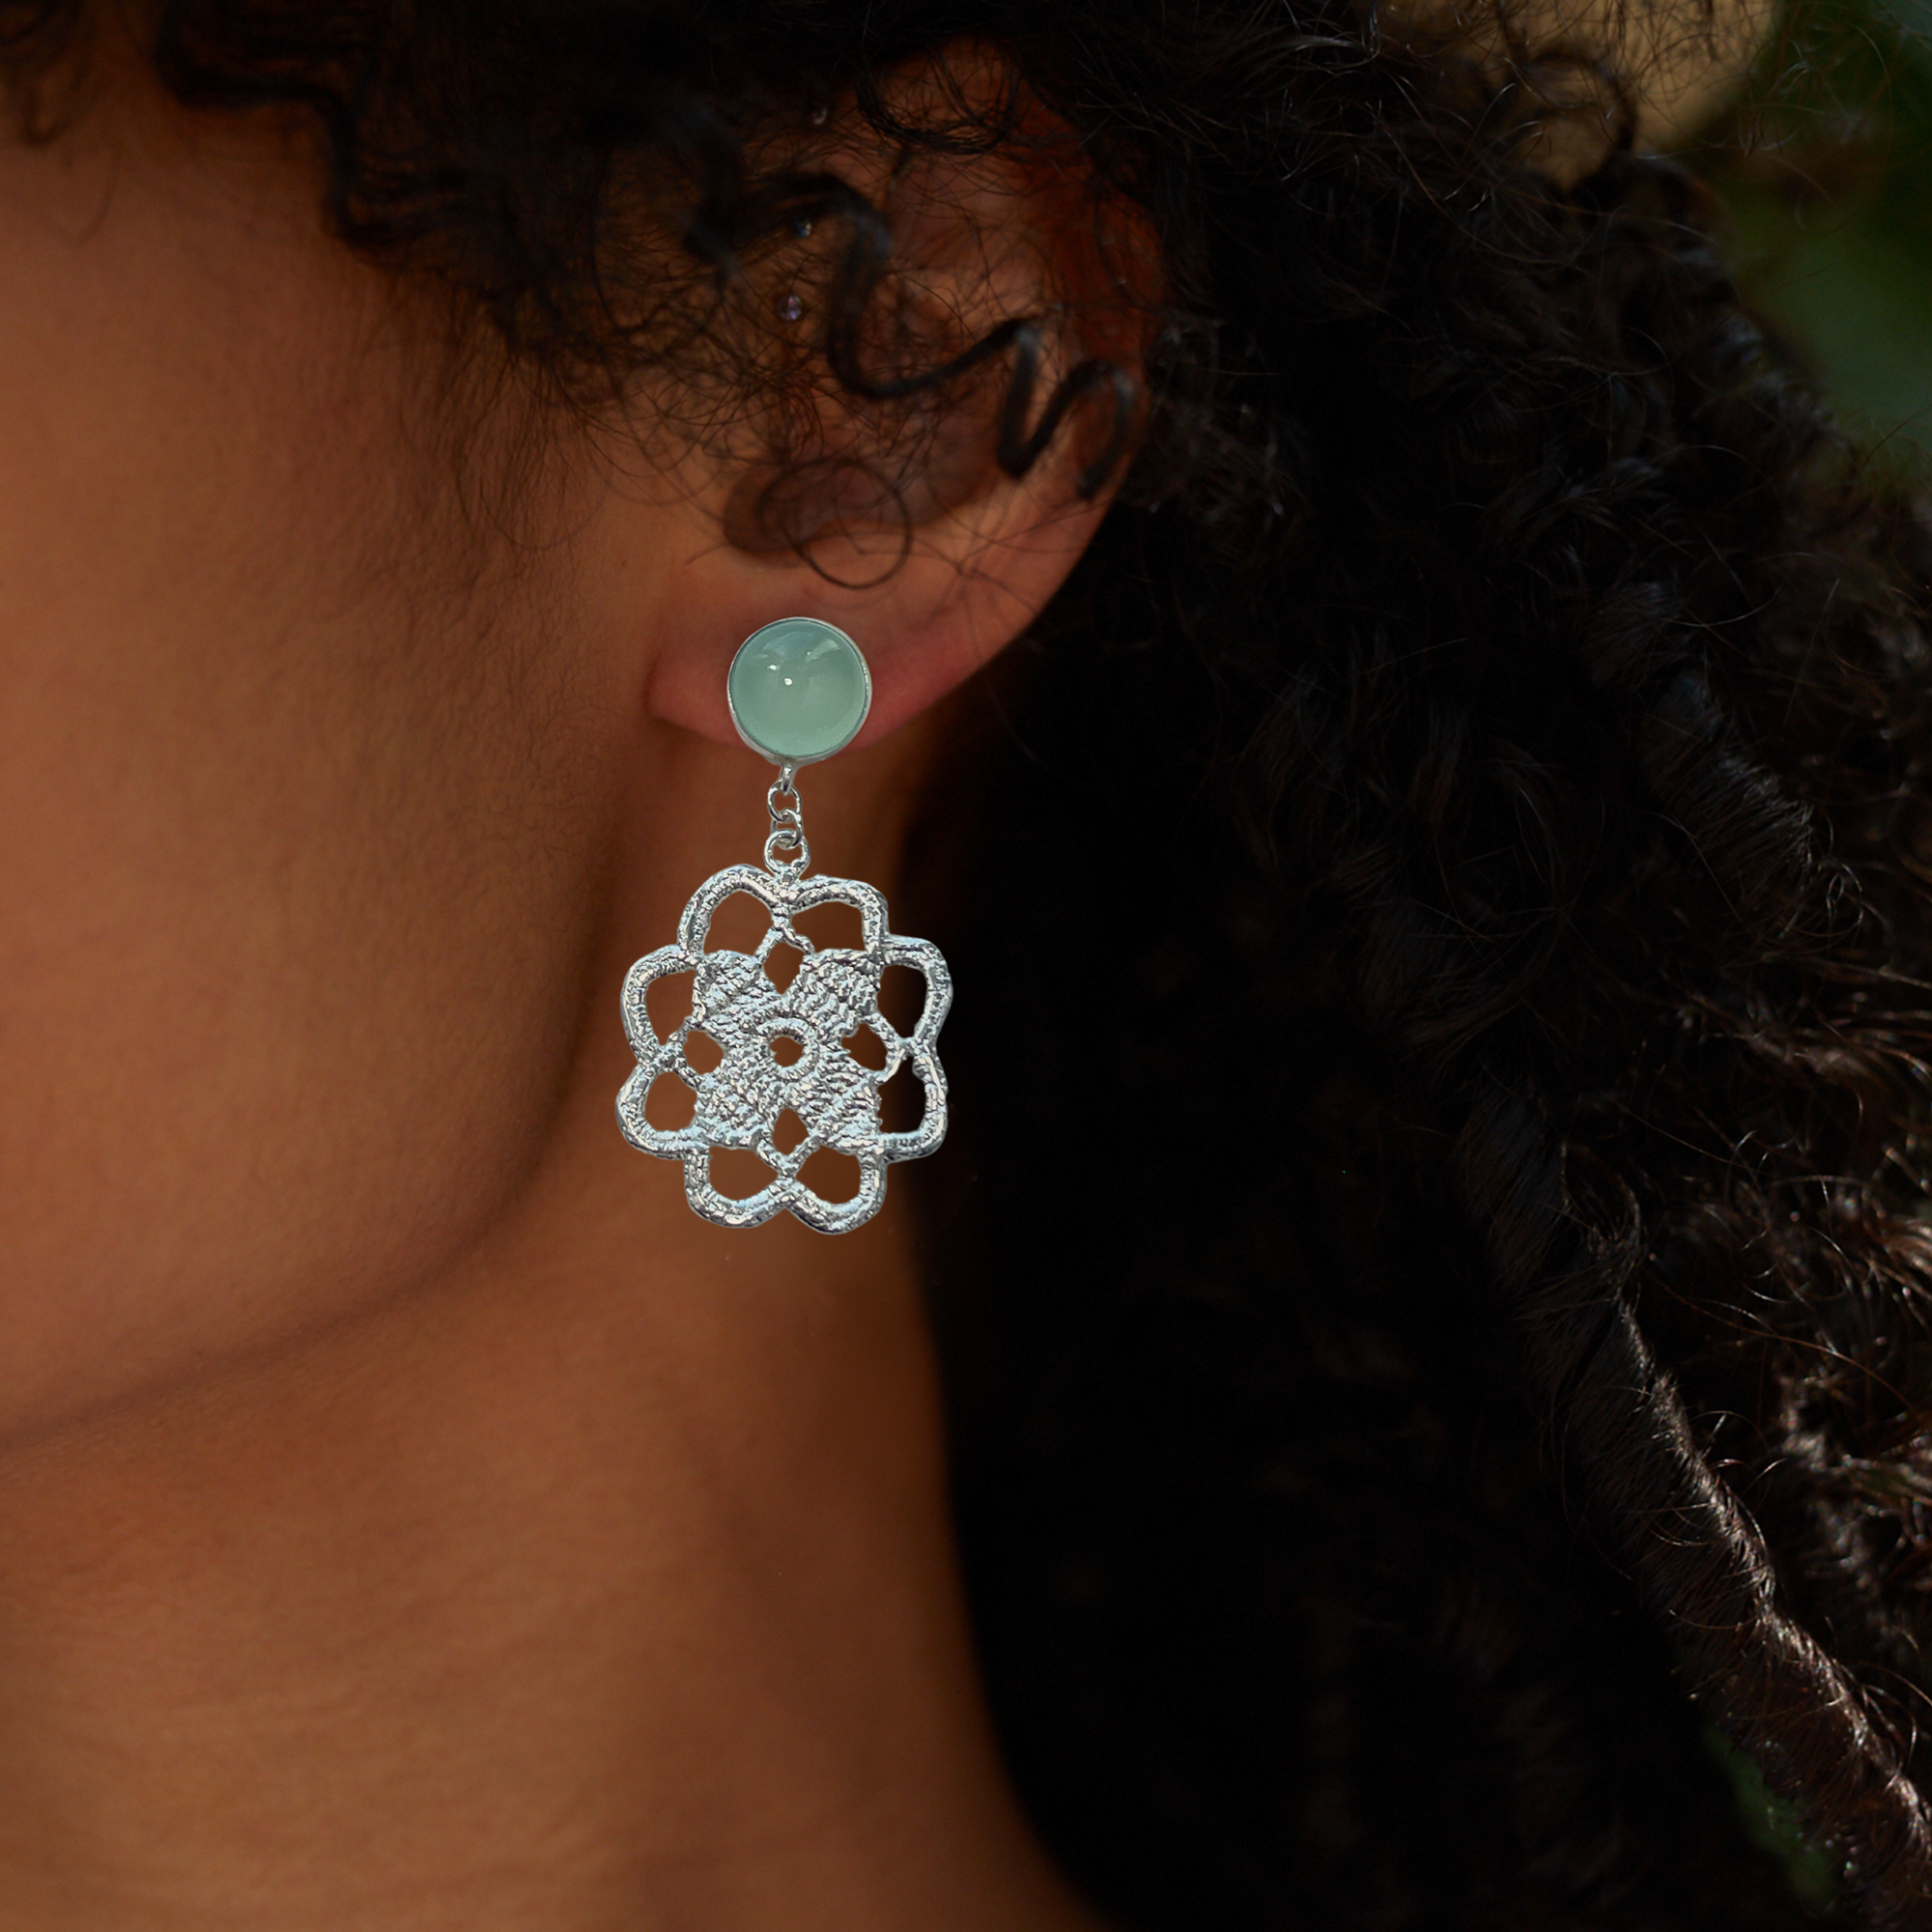 Lace flower earrings made from repurposed lace dipped in sterling silver with 10mm green Chalcedony cabochons.